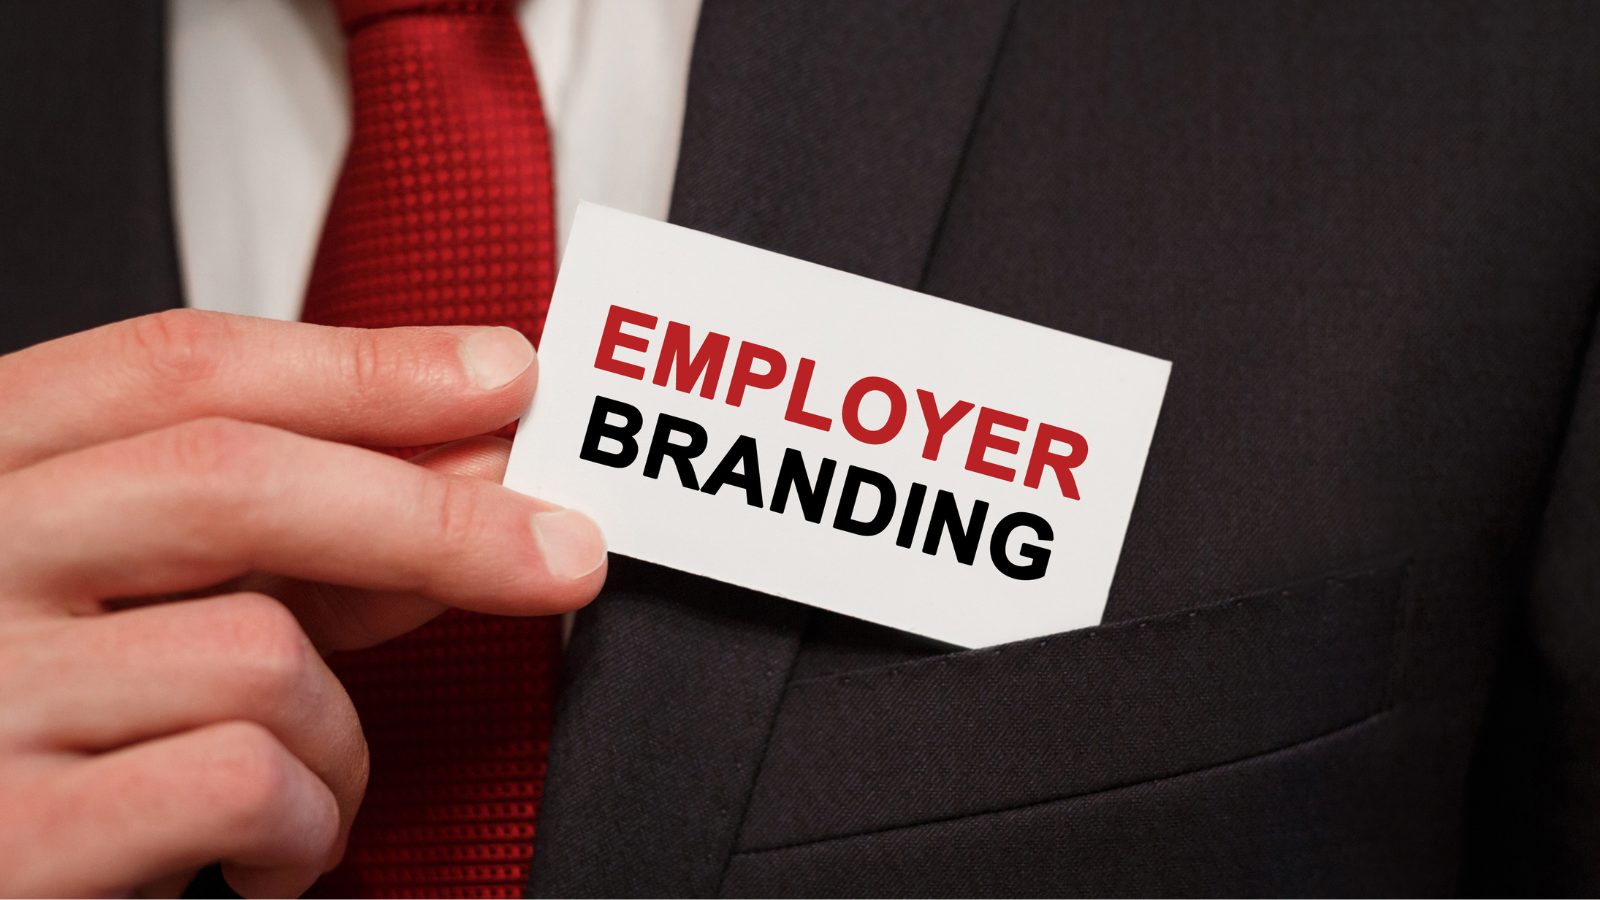 Your Employer Brand Matters